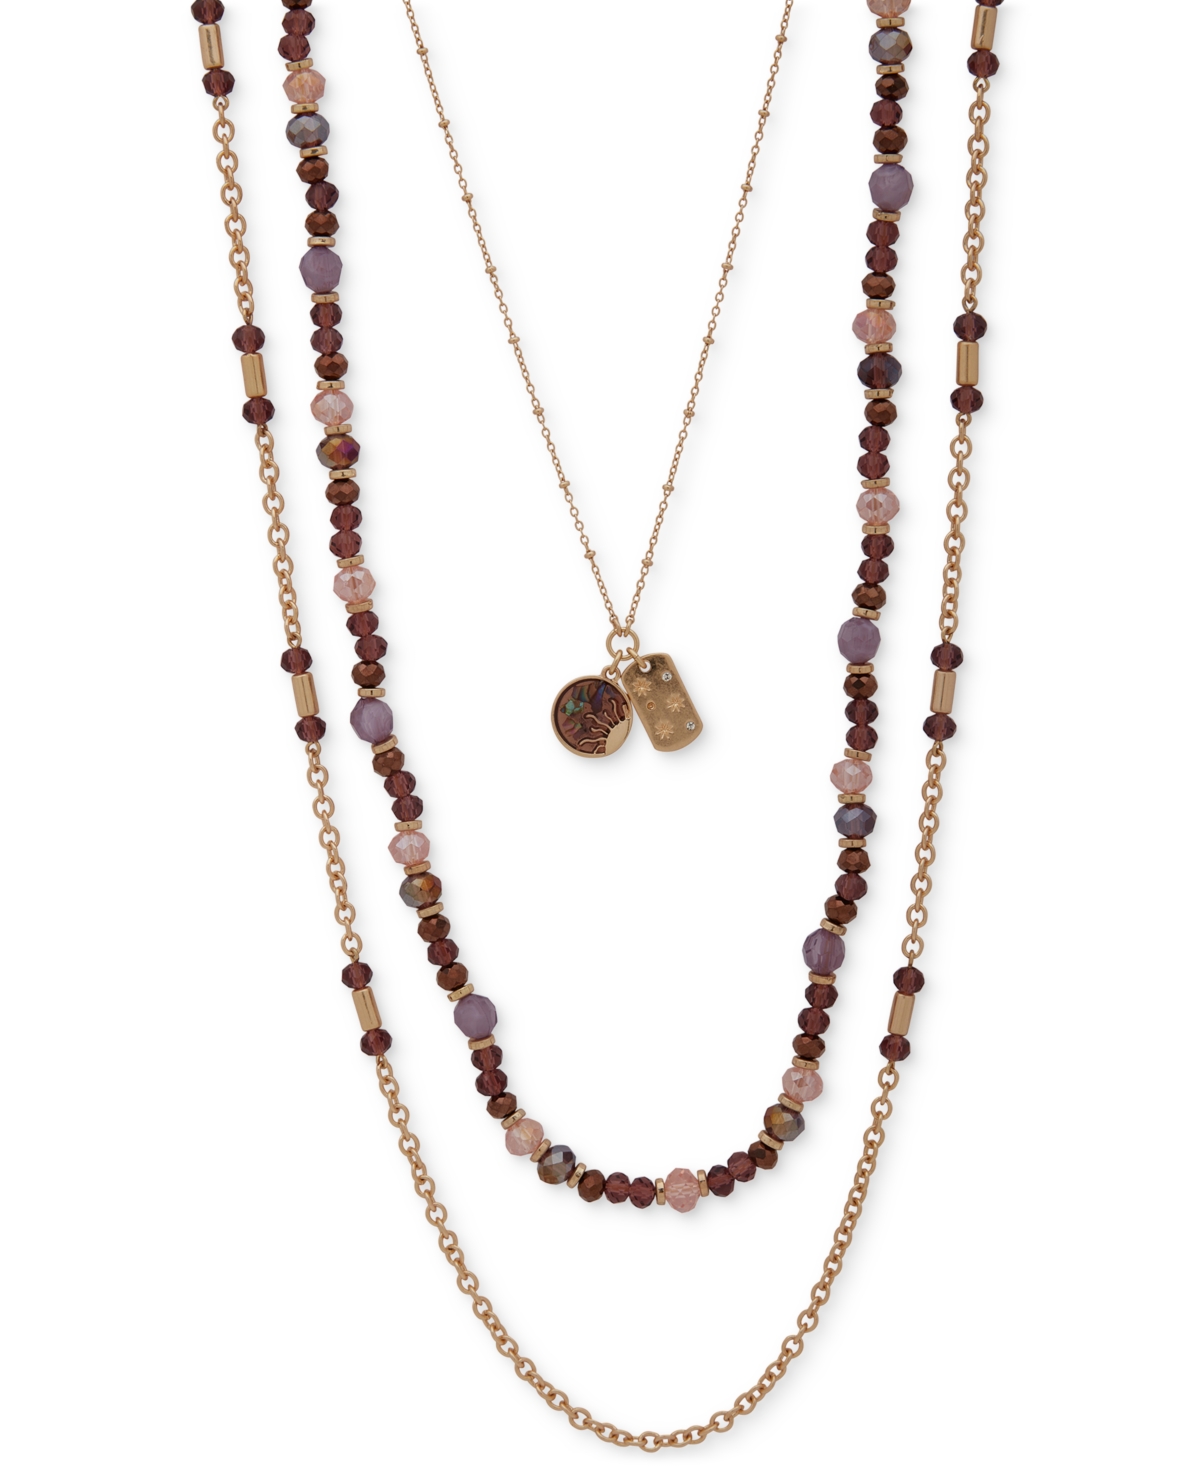 Gold-Tone Mixed Bead & Multi-Charm 18" Layered Necklace - Wine